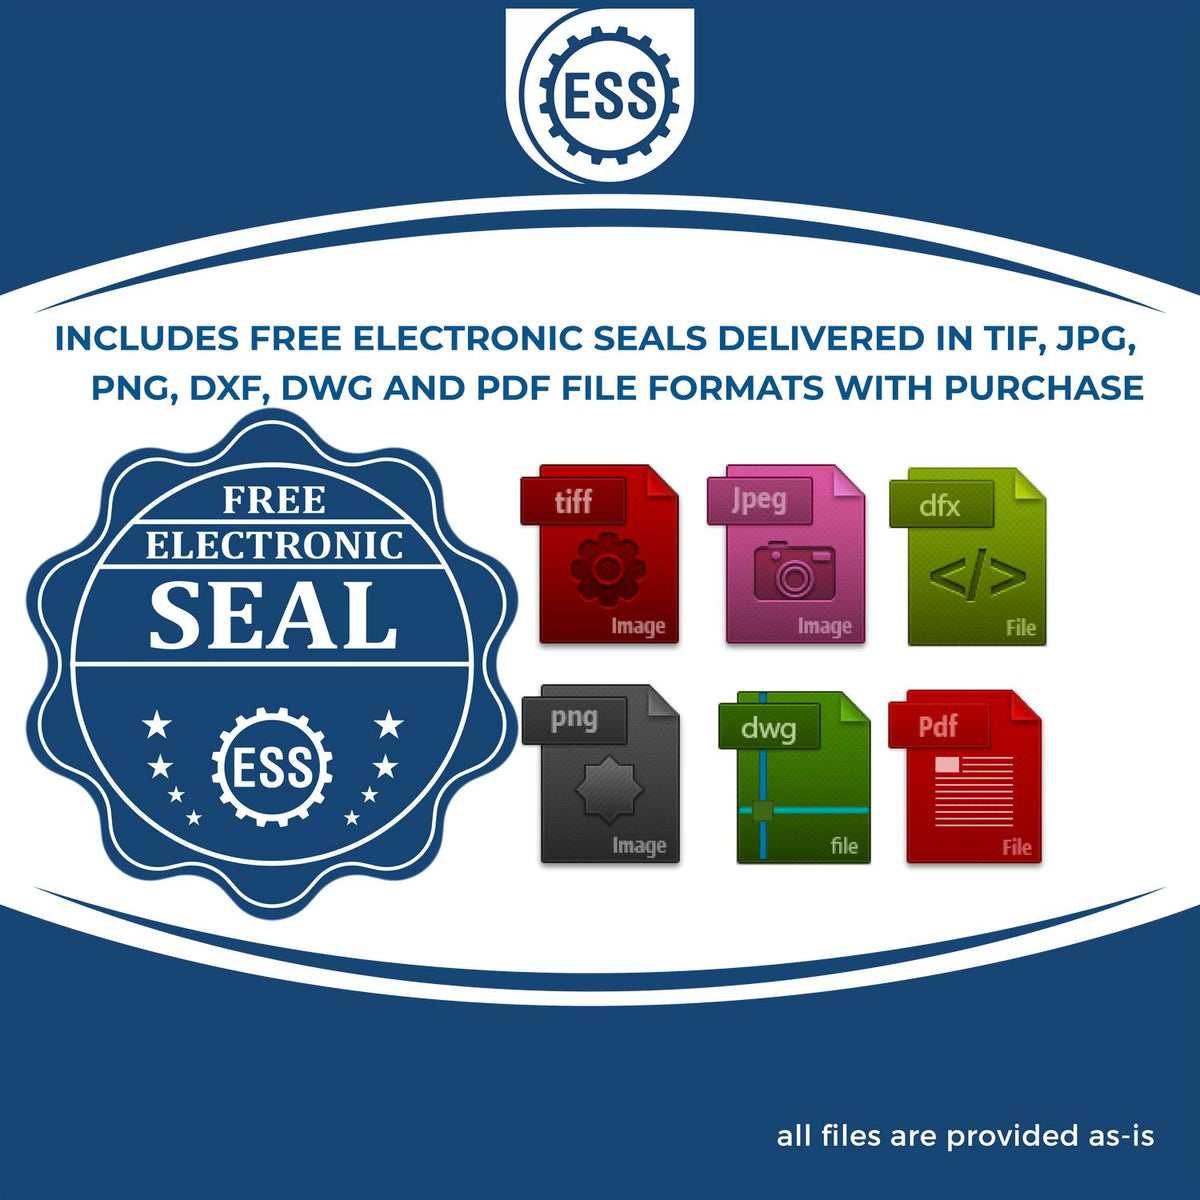 An infographic for the free electronic seal for the Premium MaxLight Pre-Inked Delaware Geology Stamp illustrating the different file type icons such as DXF, DWG, TIF, JPG and PNG.